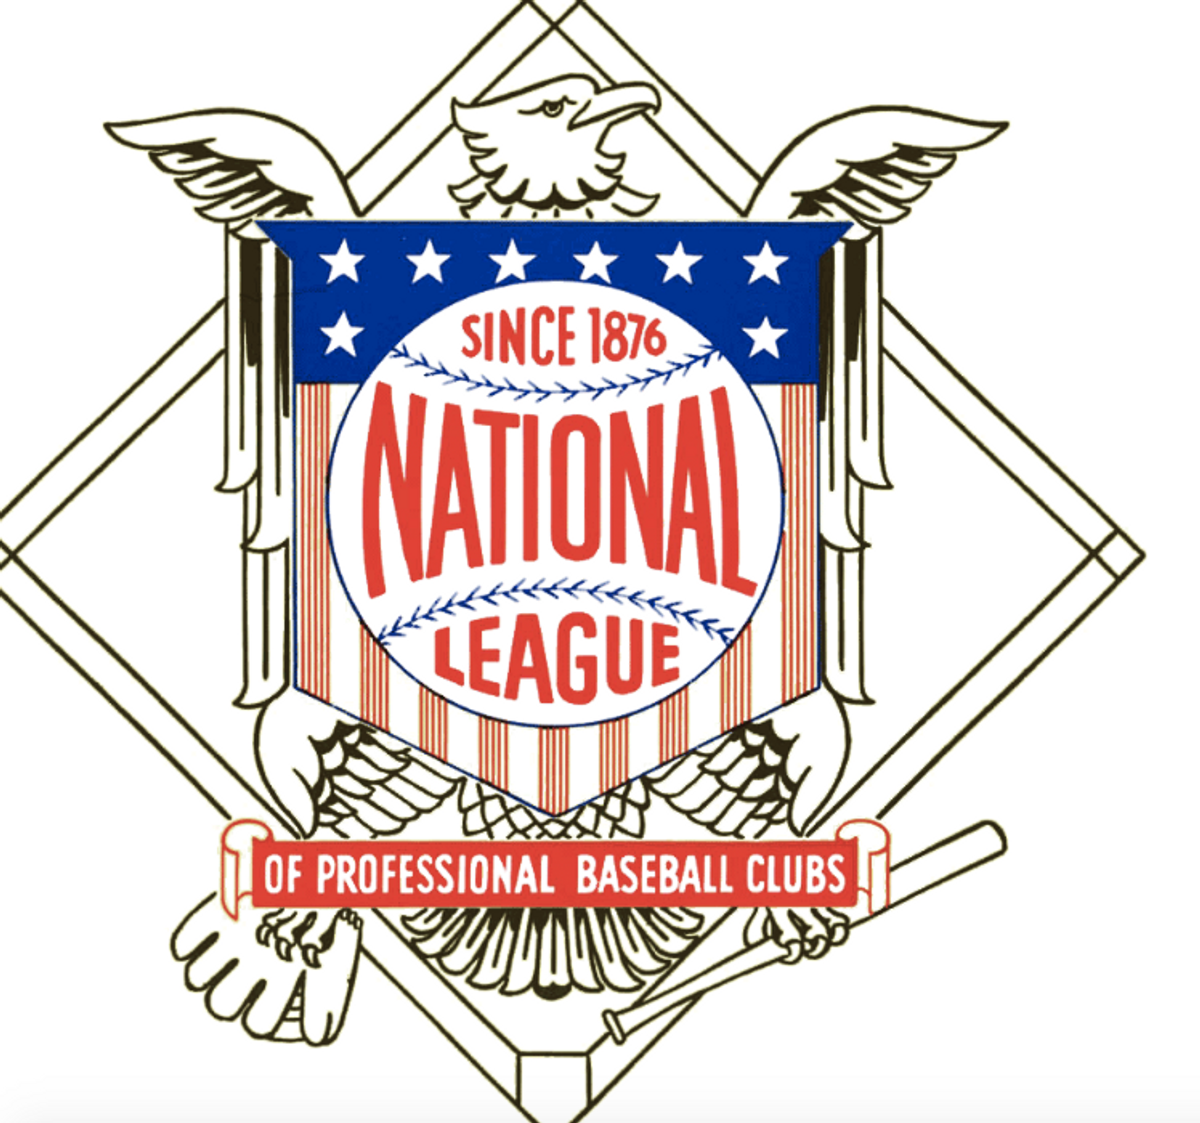 Looking At The Final Spots For Each Division In The National League